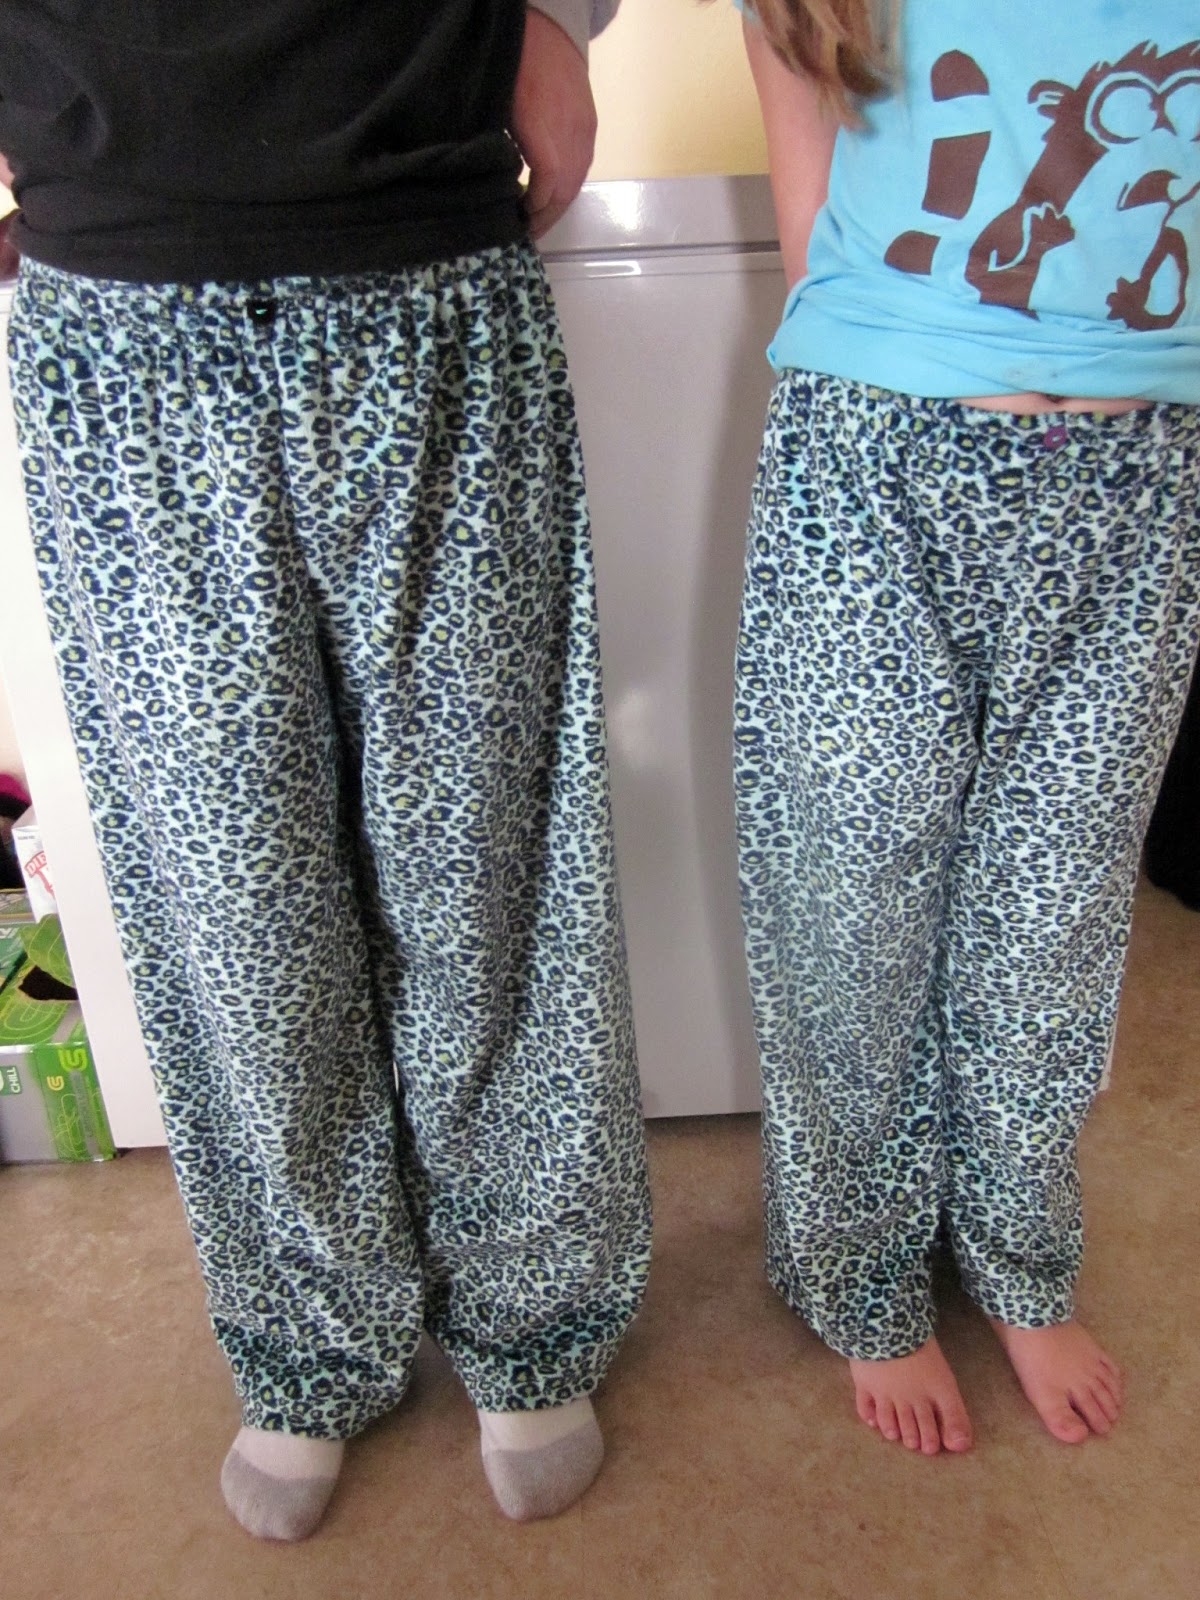 SunnySewing: Having a bad day? Make some soft, fuzzy pjs!